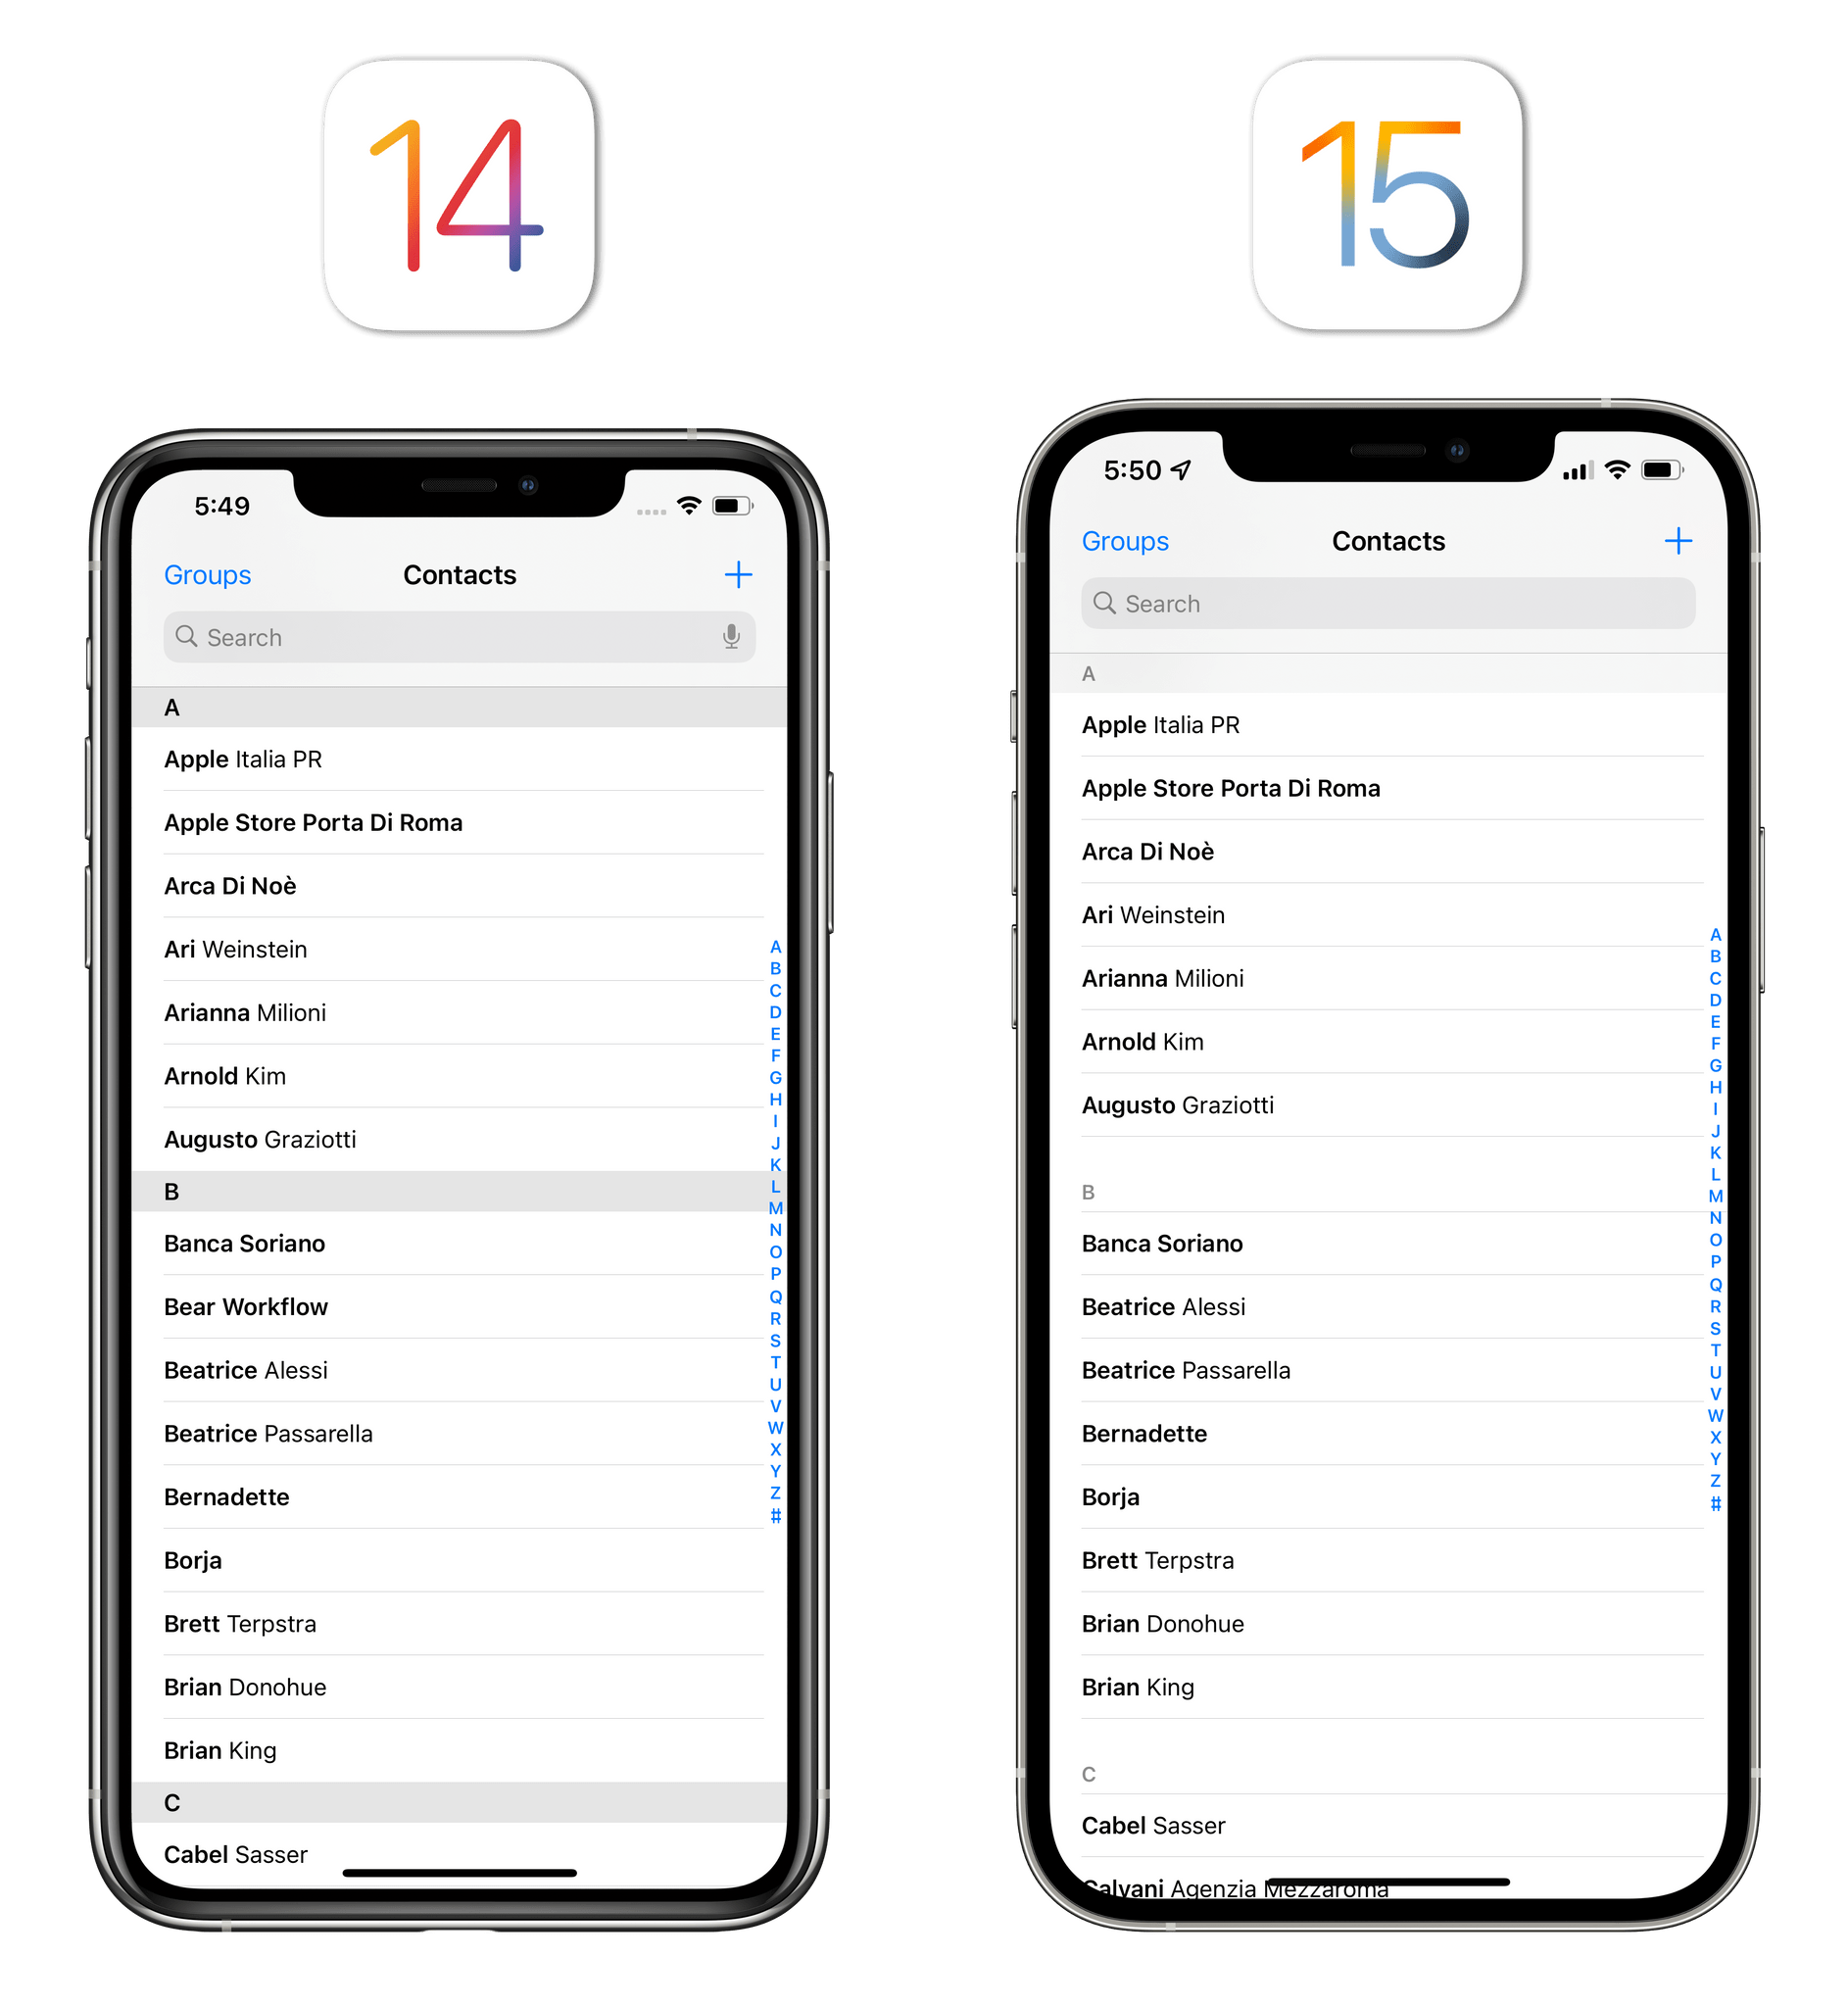 The new look for table views in iOS 15.